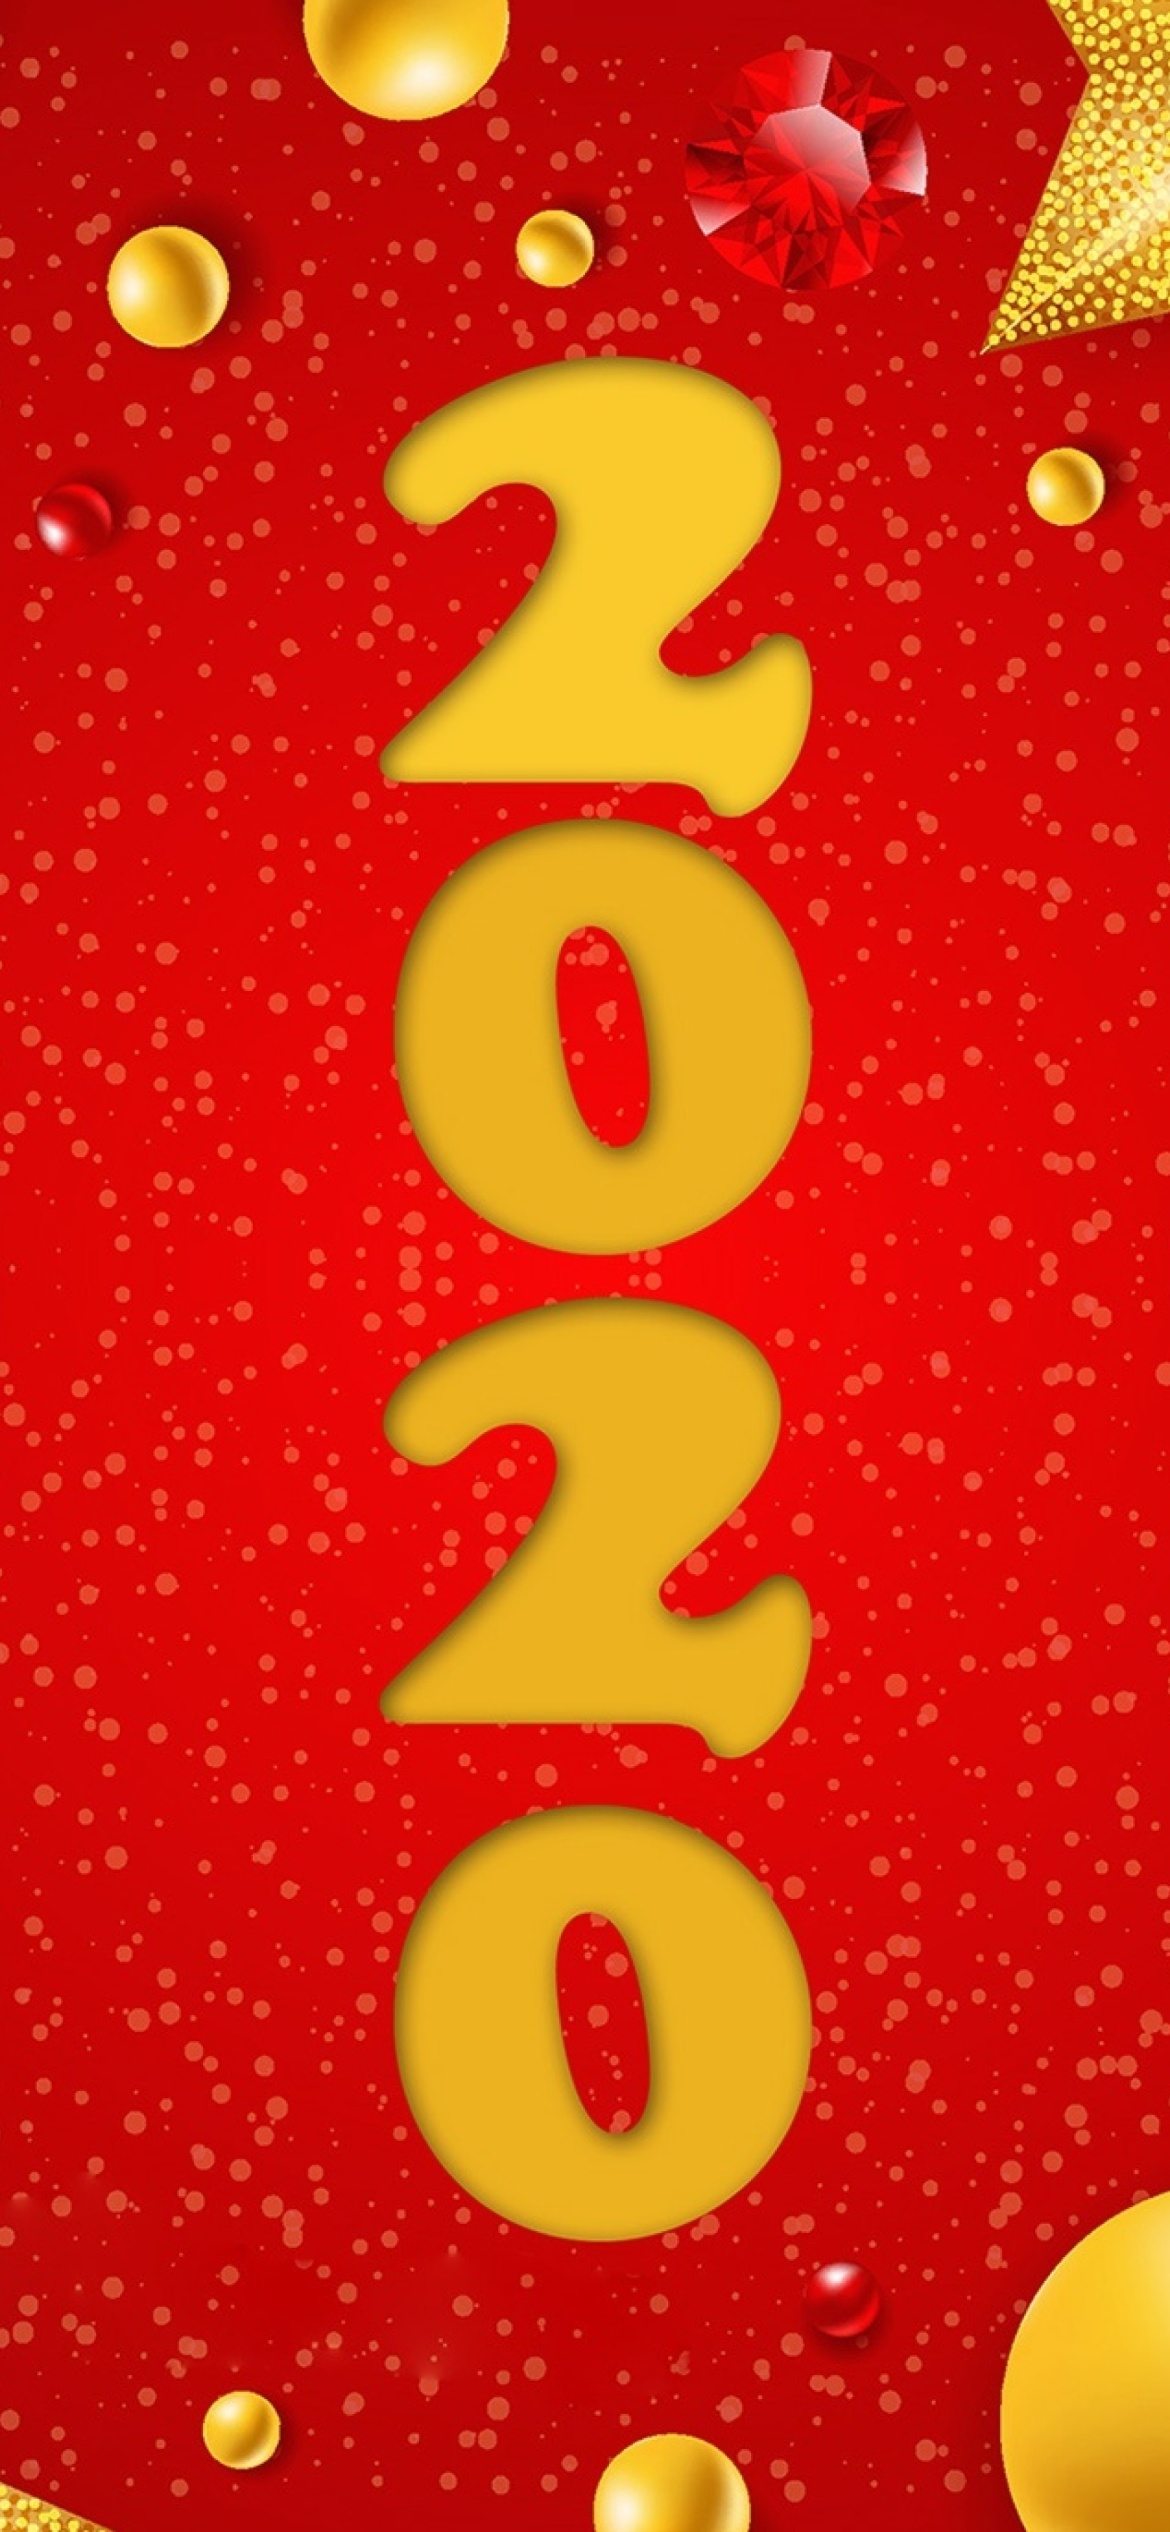 Happy New Year 2020 Messages wallpaper 1170x2532